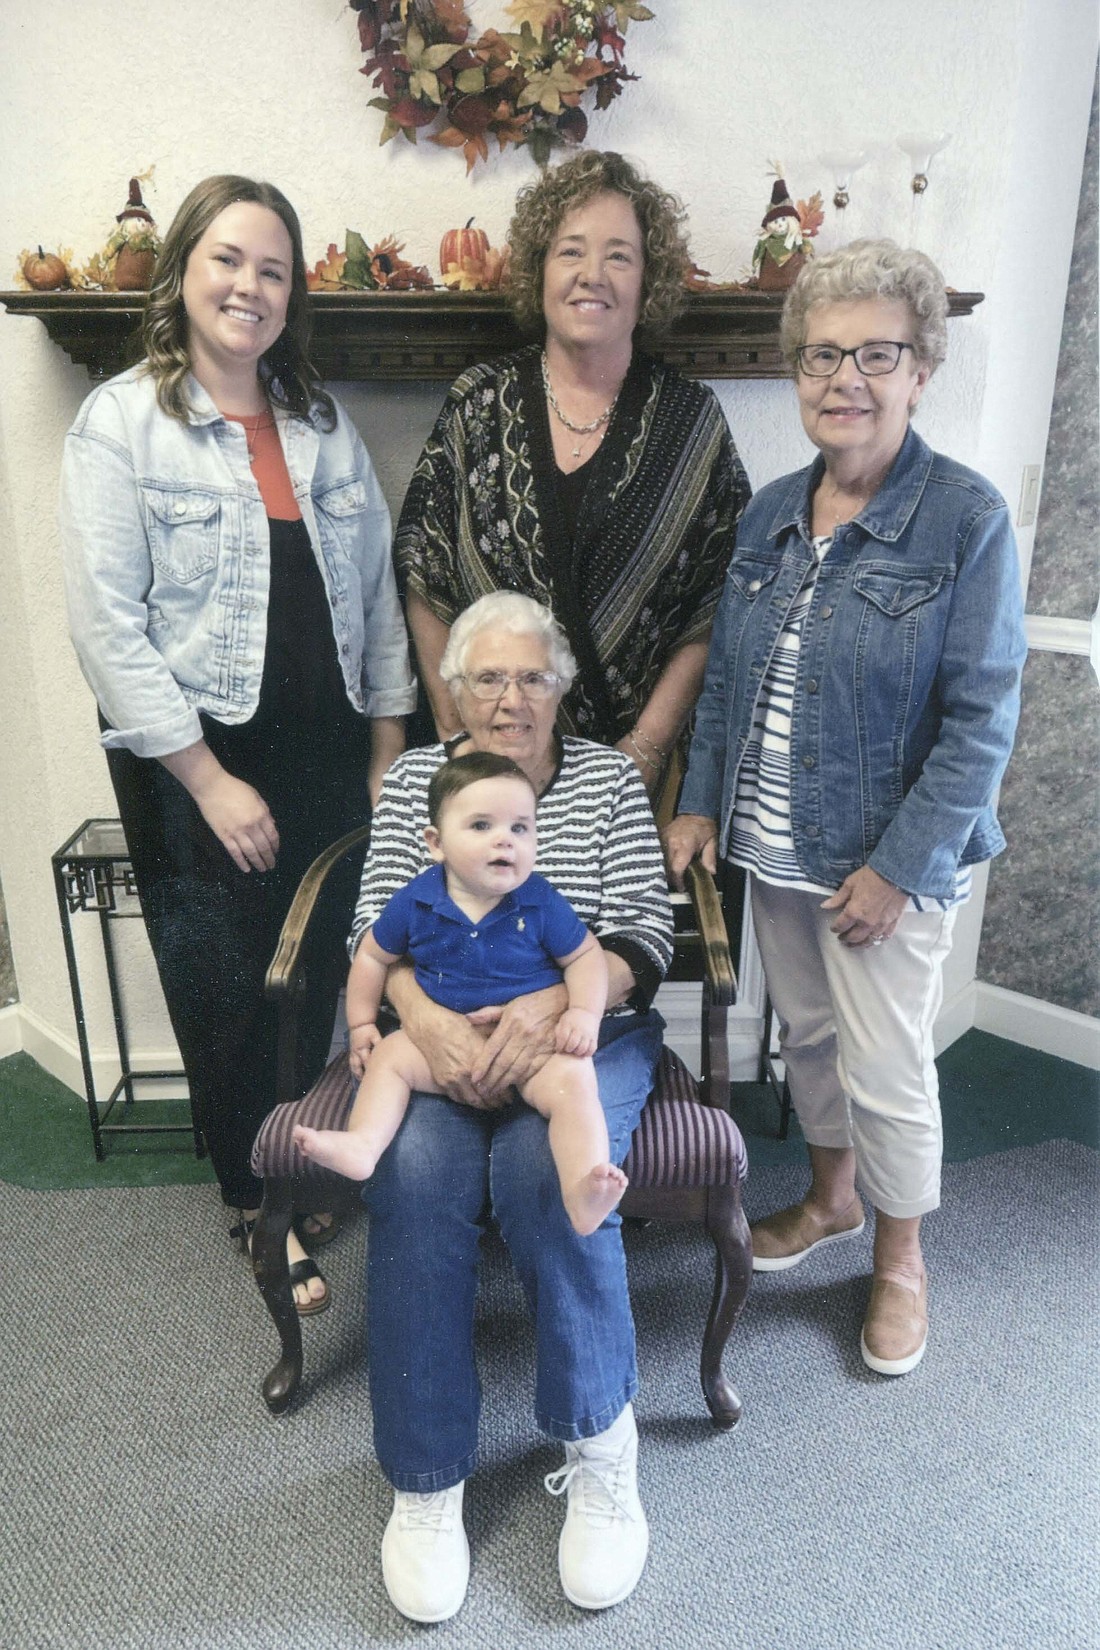 Pictured are five generations of the Simmons family. In front are Graham Watts of Carmel and great great-grandmother Roberta Simmons of Union City. In the back row, from left, are mother Katharyn Watts of Carmel, grandmother Sarah Daugherty of Yorktown and great-grandmother Maria Hiatt of Portland. (Photo provided)